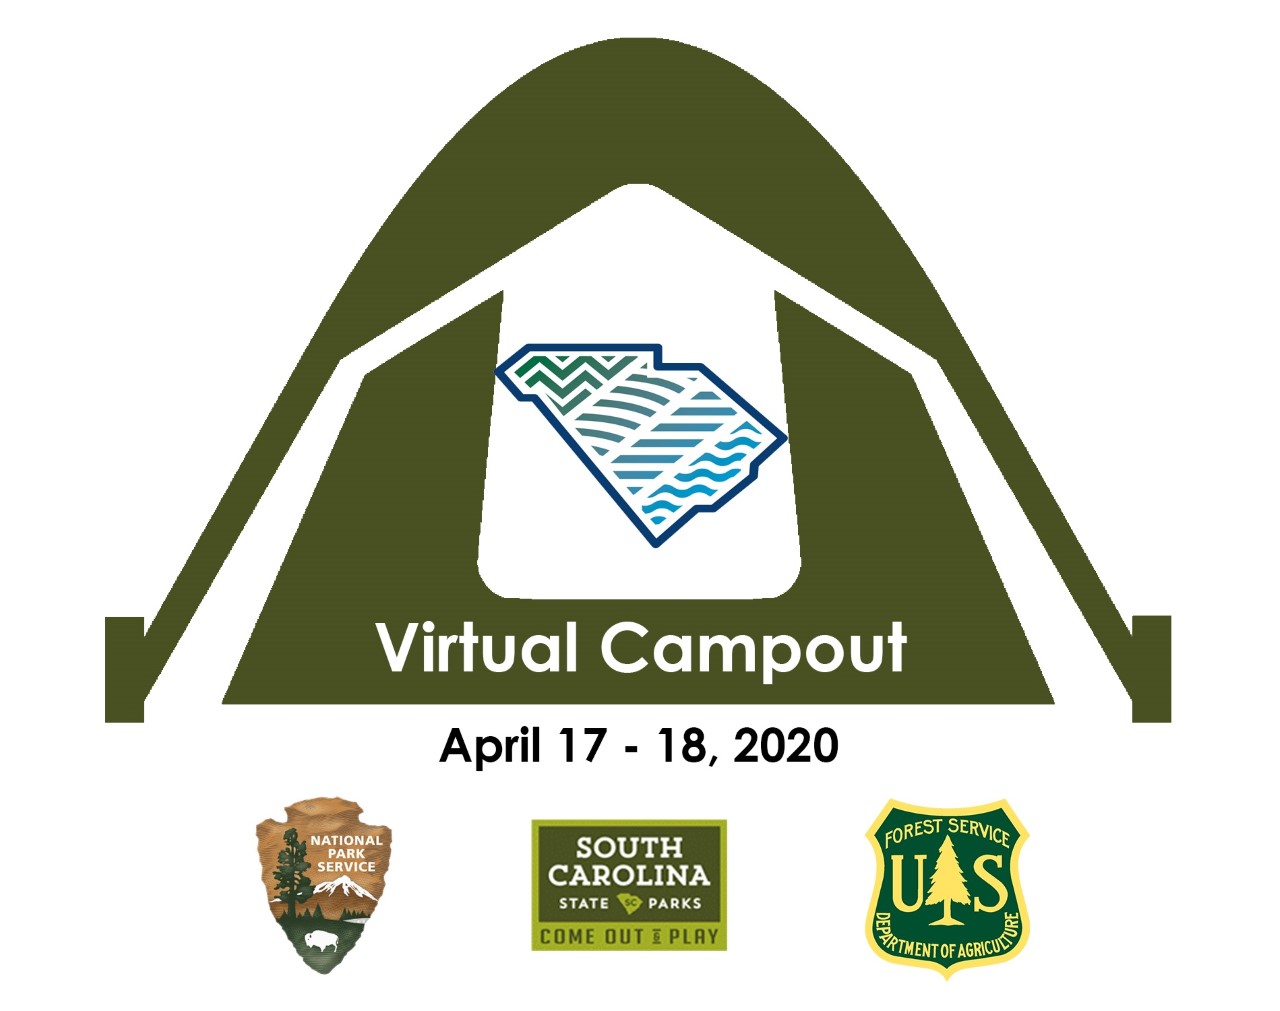 A green tent outline with South Carolina state shape inside; NPS, SC State Parks, and USFS logos on bottom